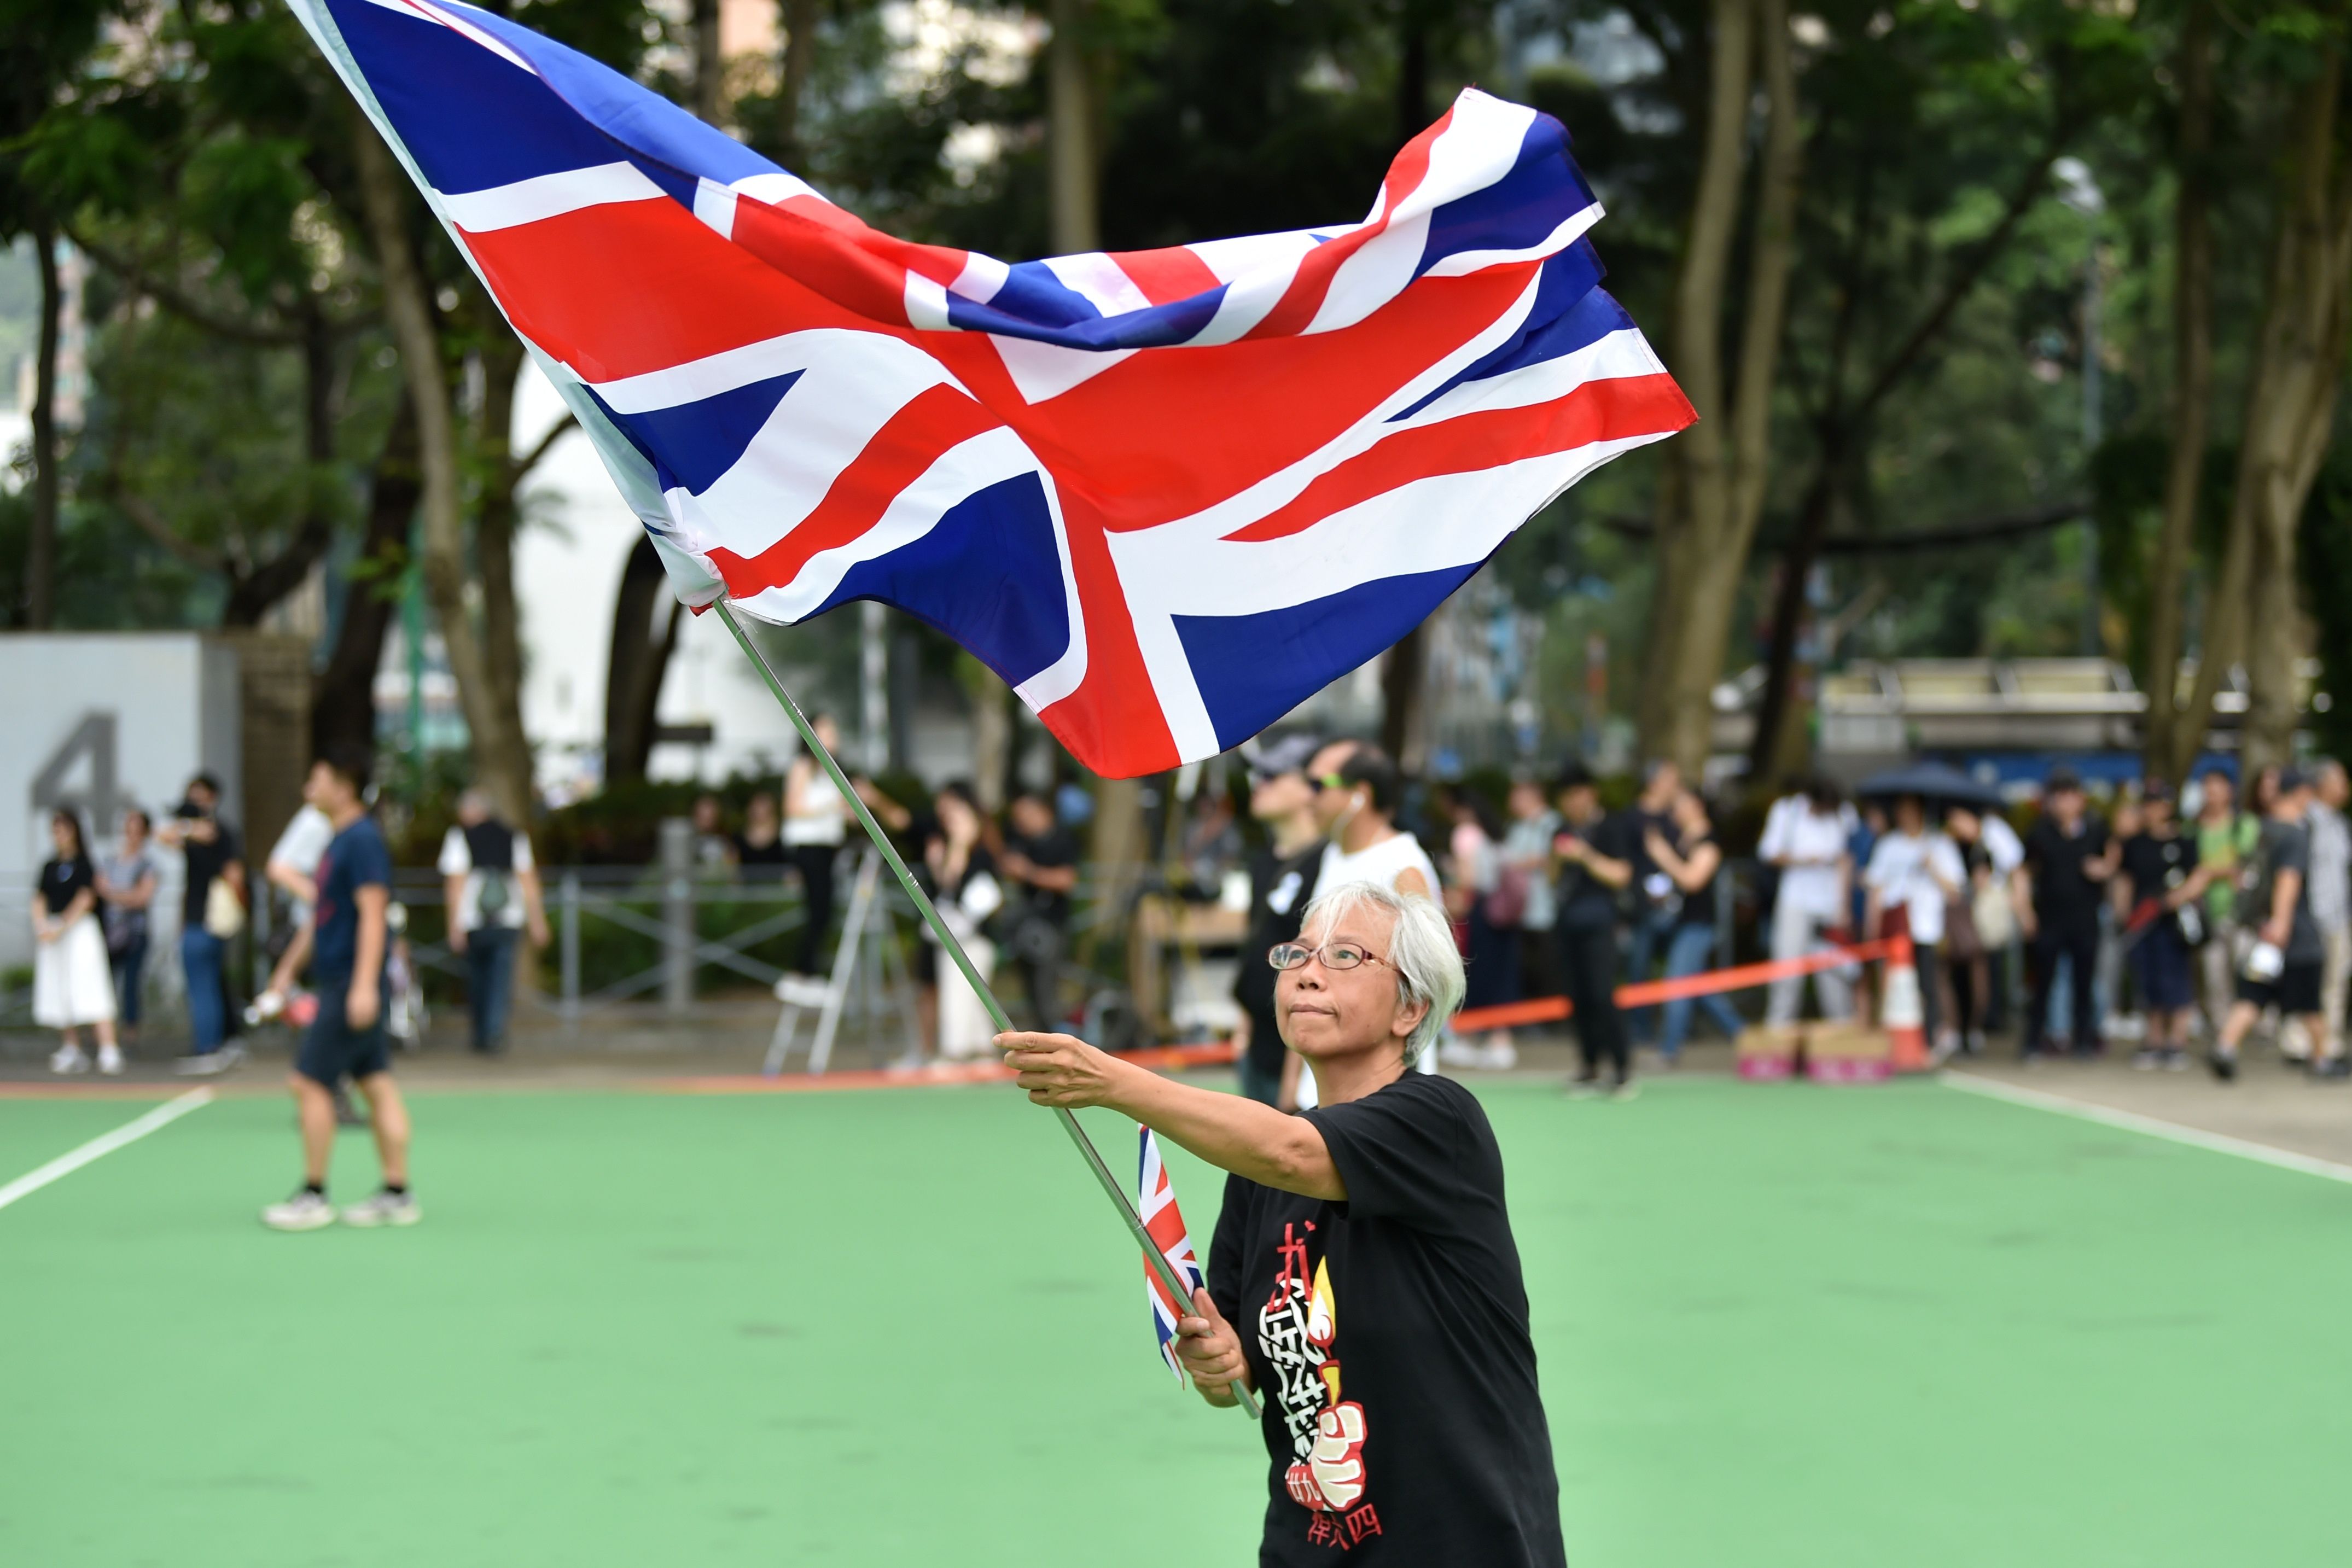 A woman waves a British flag as protesters gather to take part in a new rally in Hong Kong.